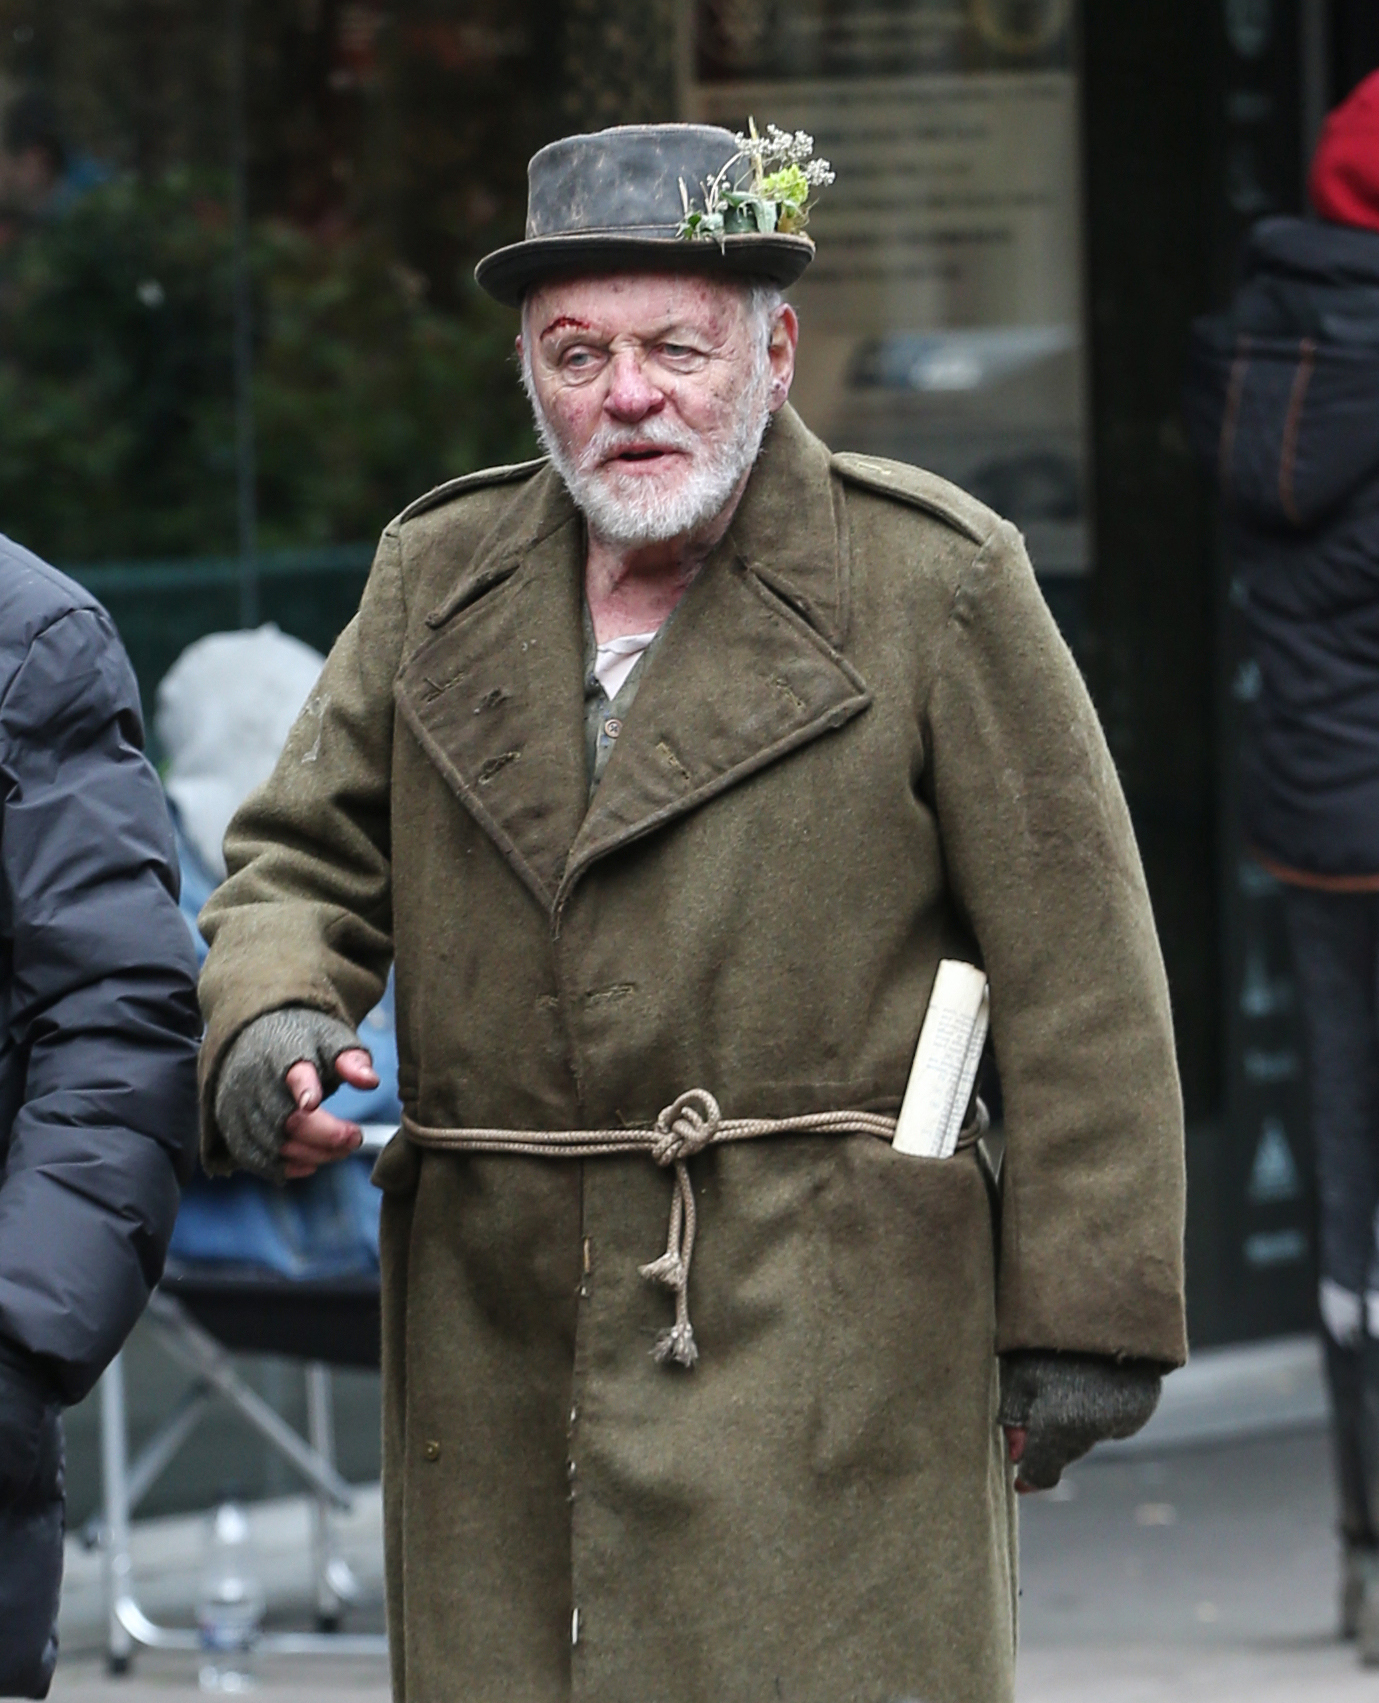 Anthony Hopkins seen filming his new film King Lear in London.

BYLINE ISOIMAGES LTD TO BE USED.